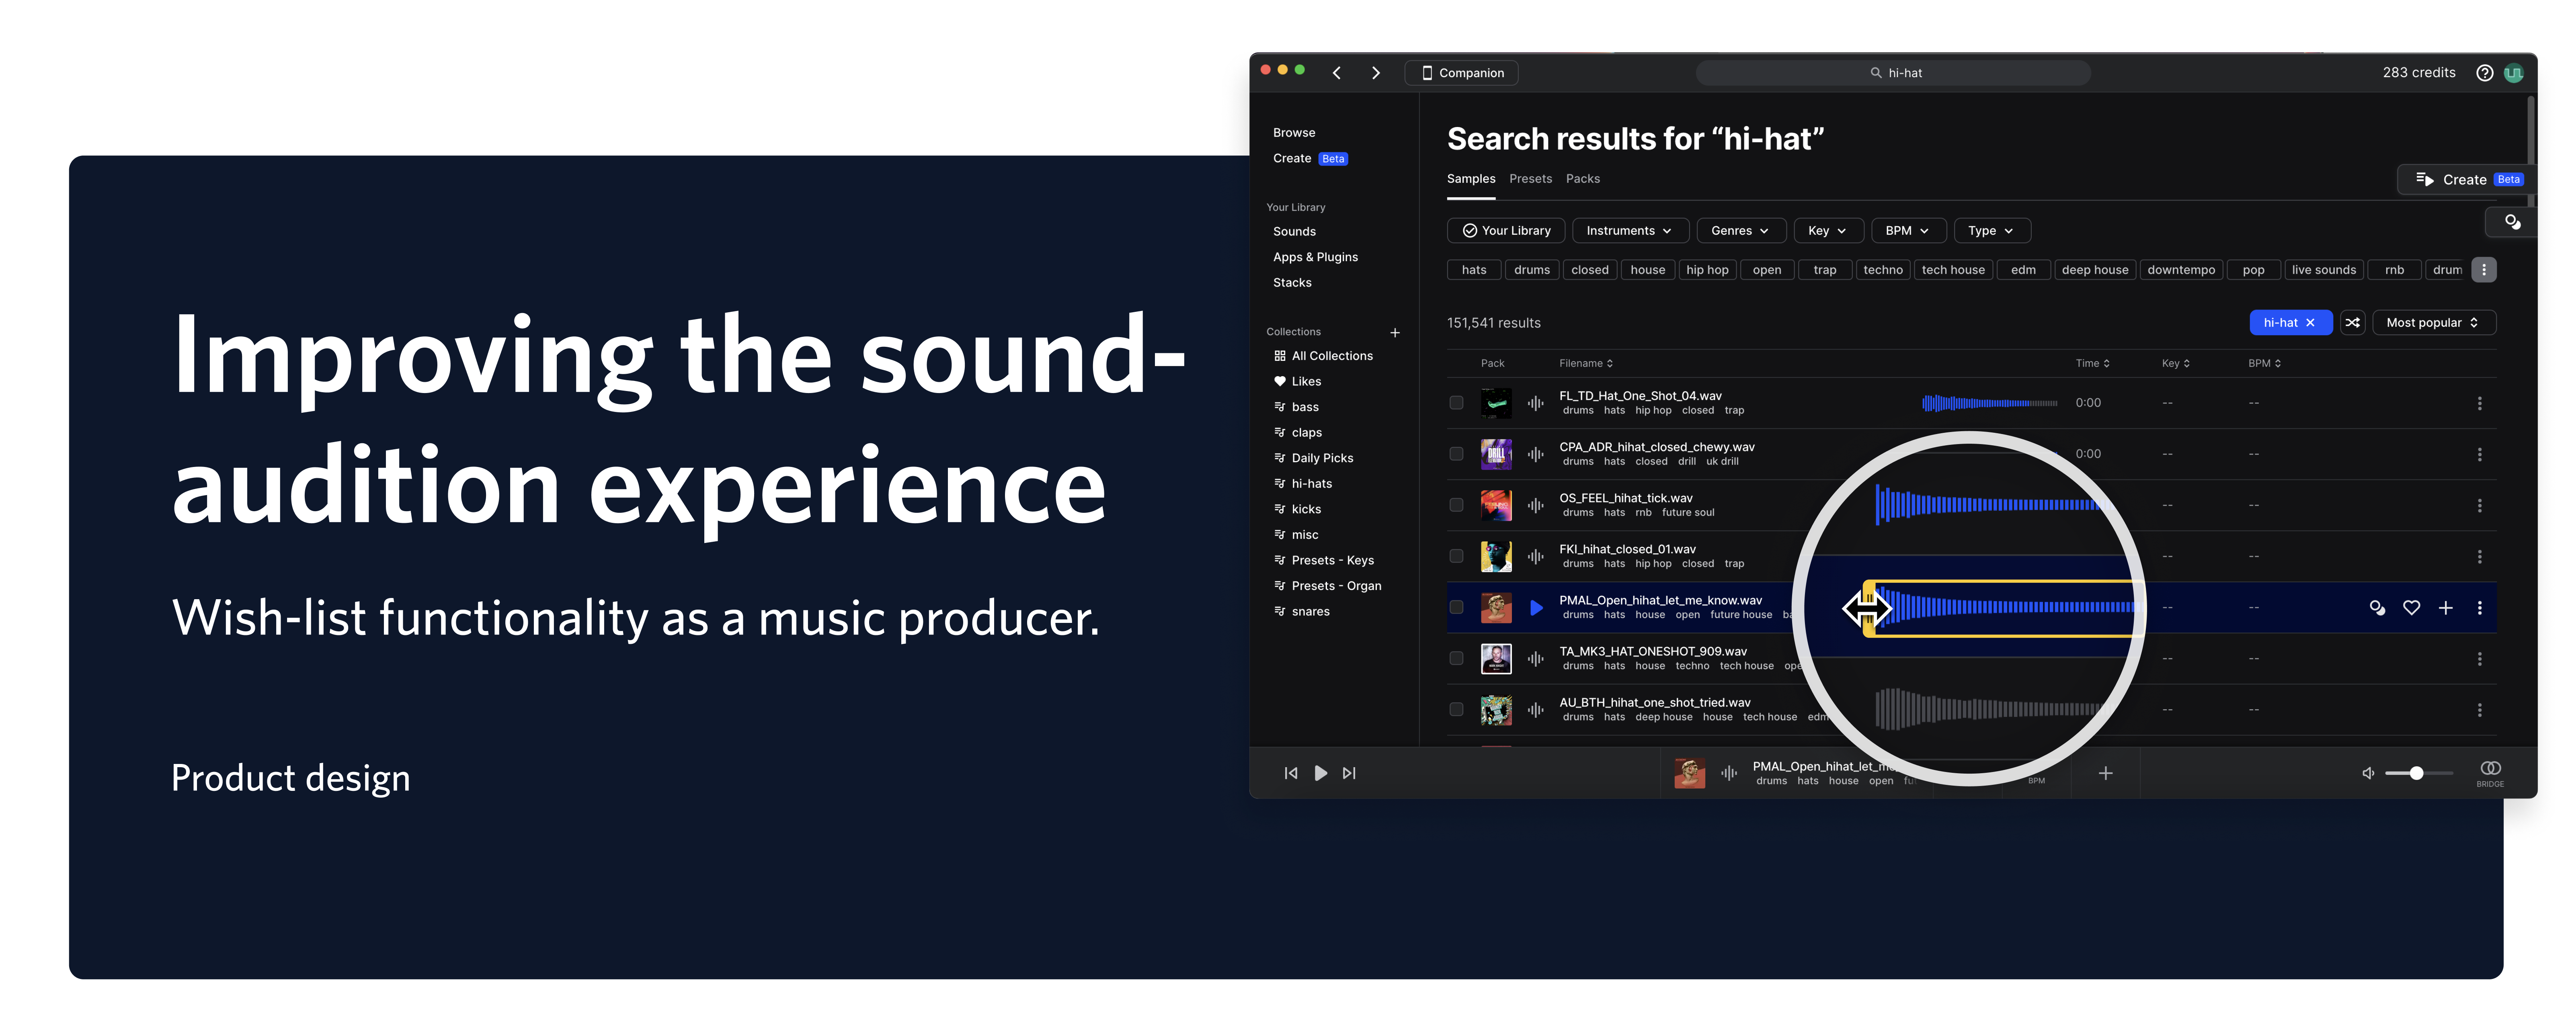 Protected: Improving the sound-audition experience